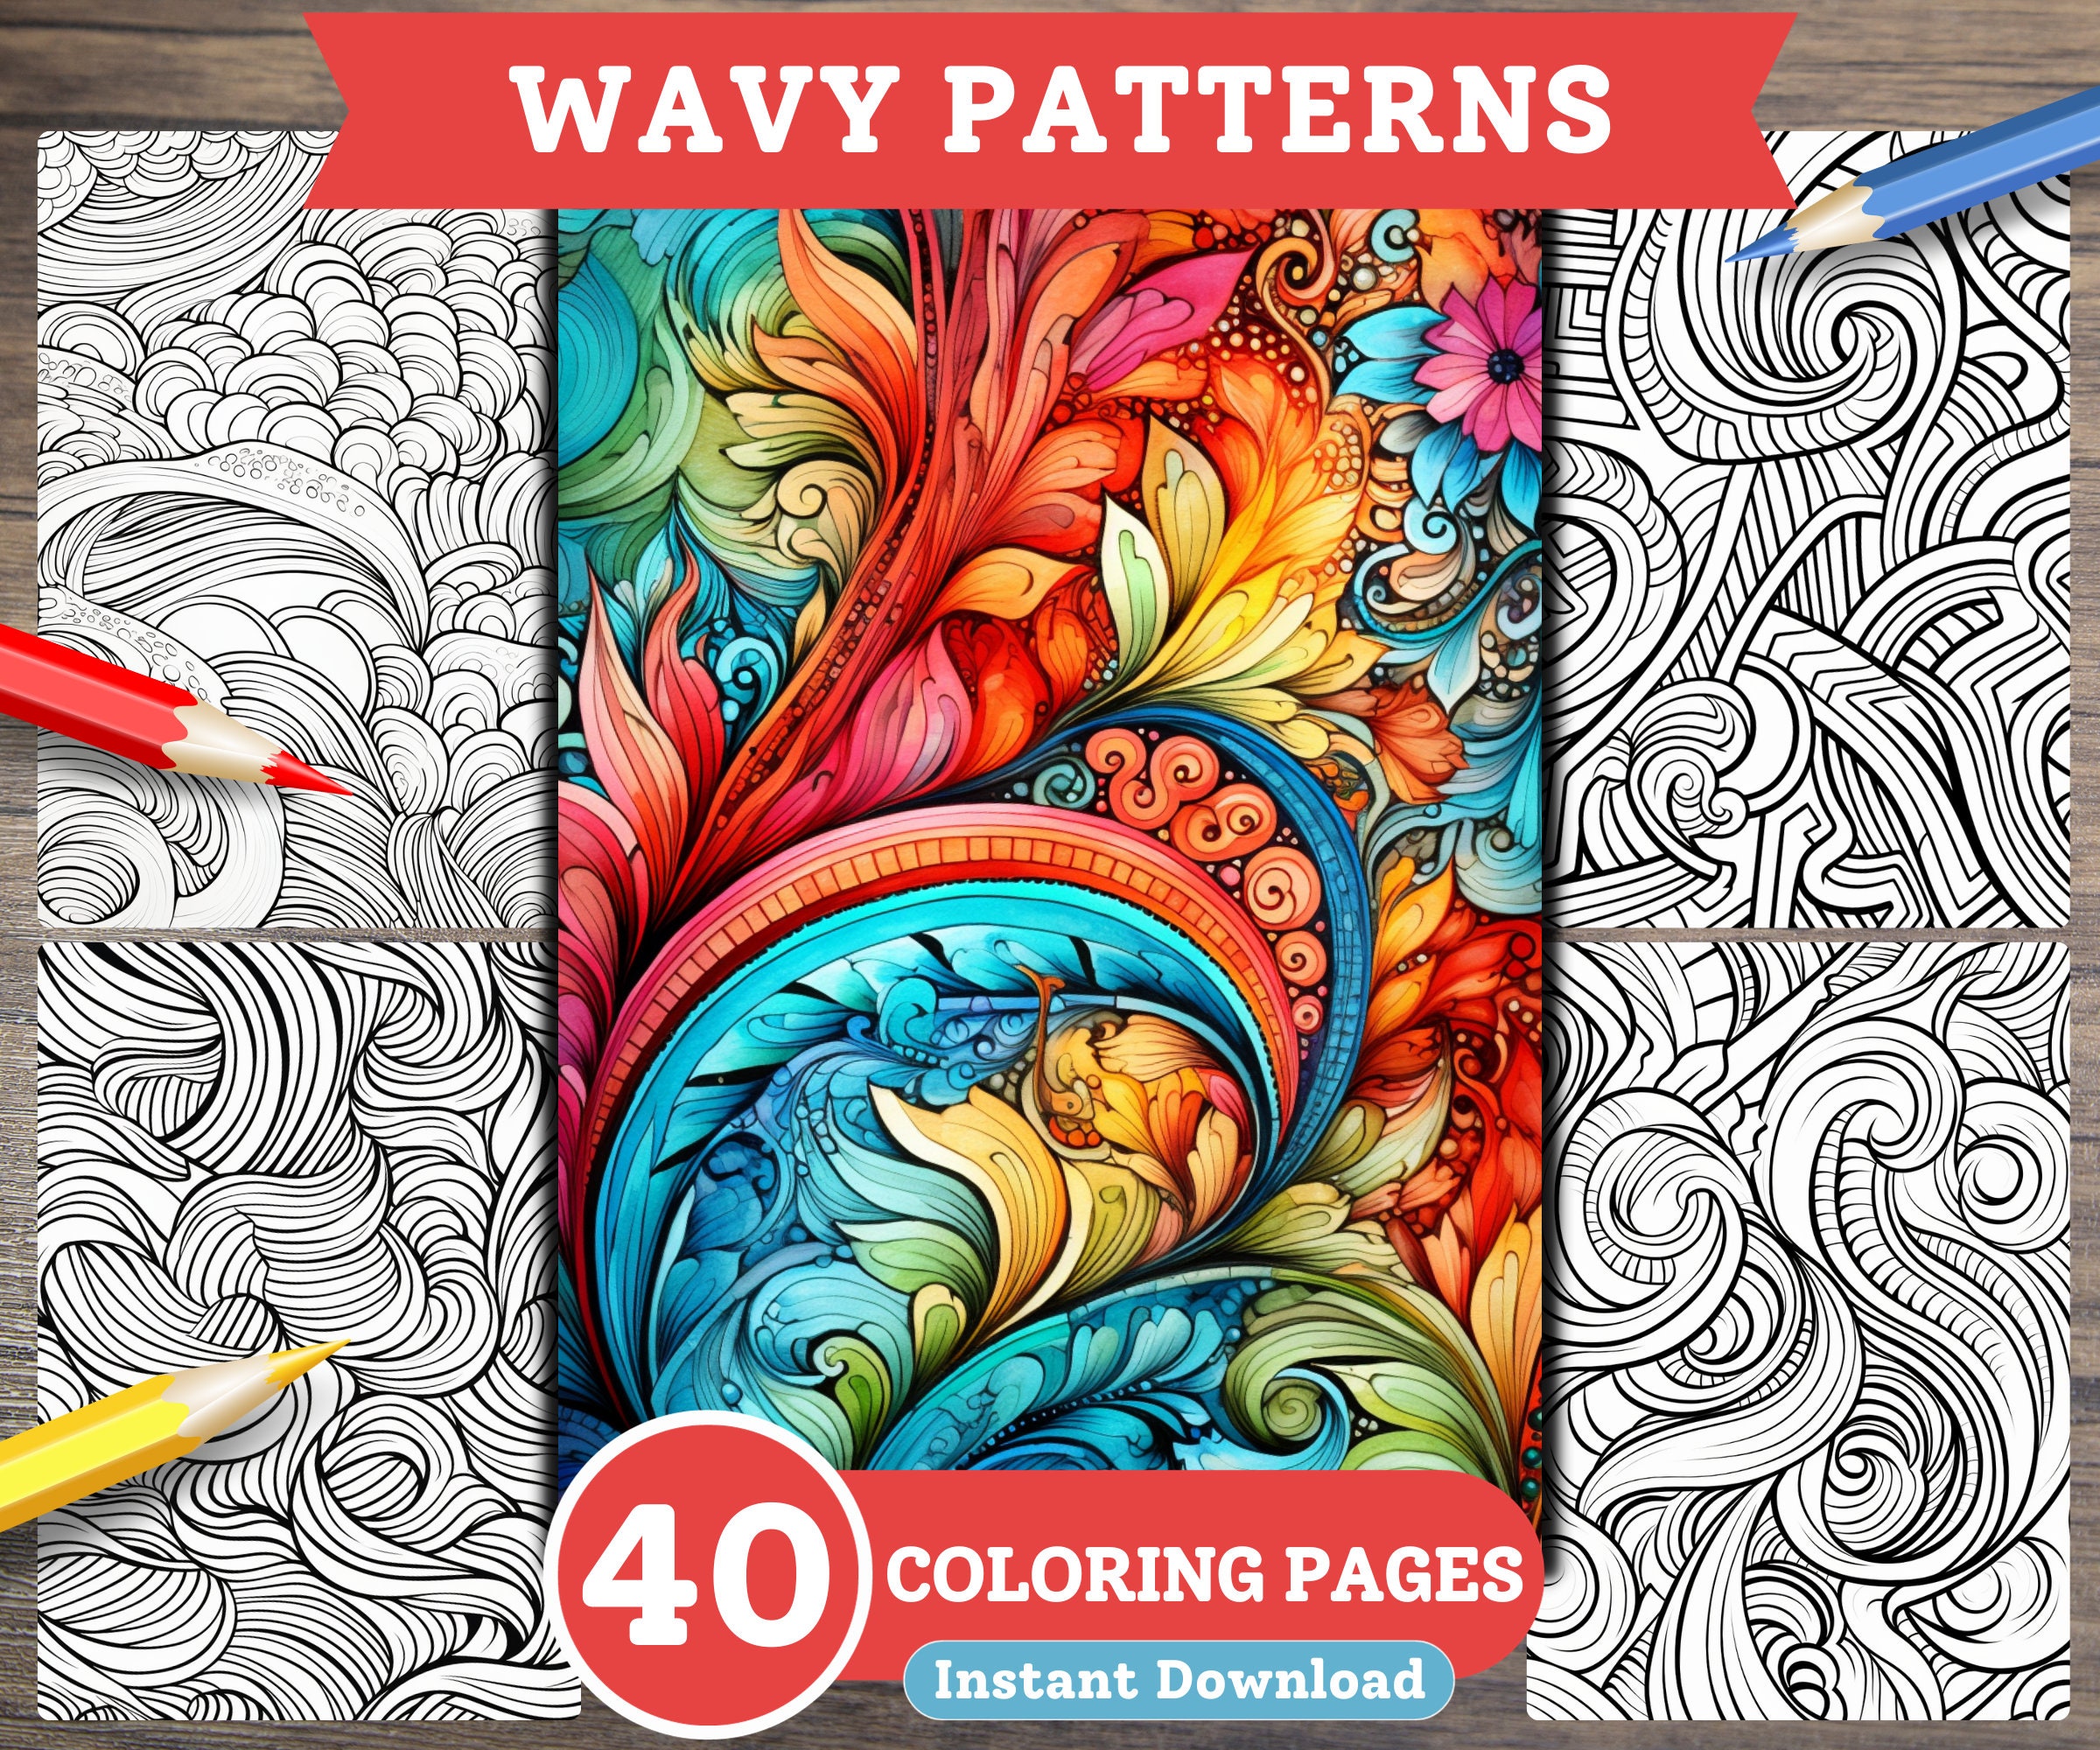 Simply Satisfying Coloring Book